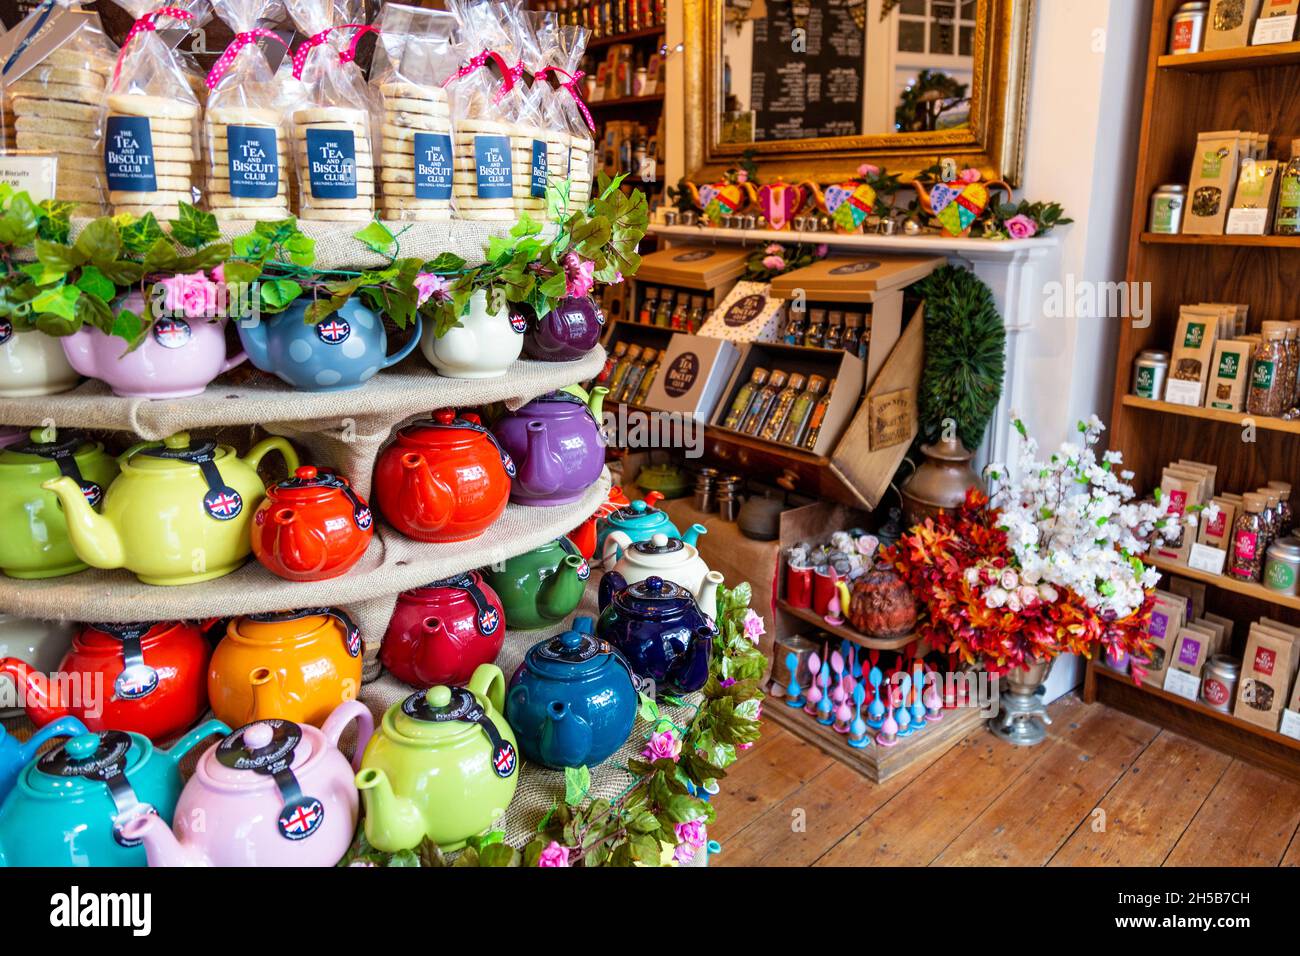 Display of tea pots and teas at The Tea and Biscuit Club shop in Arundel, West Sussex, London, UK Stock Photo